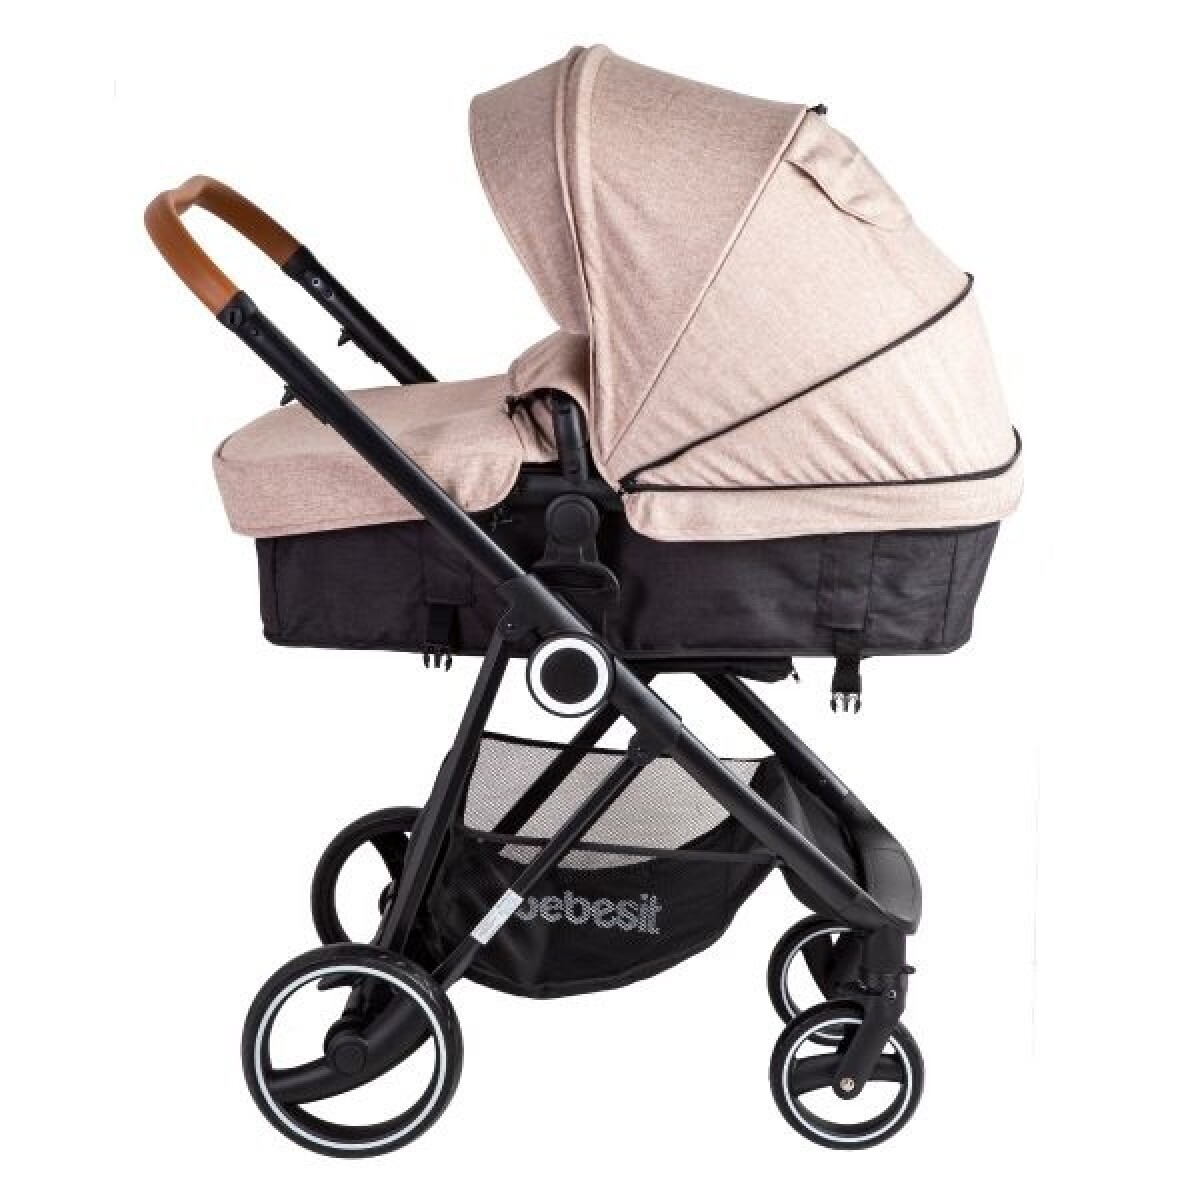 Coche Bebesit Cosmos Ts Deluxe Travel System Beige 